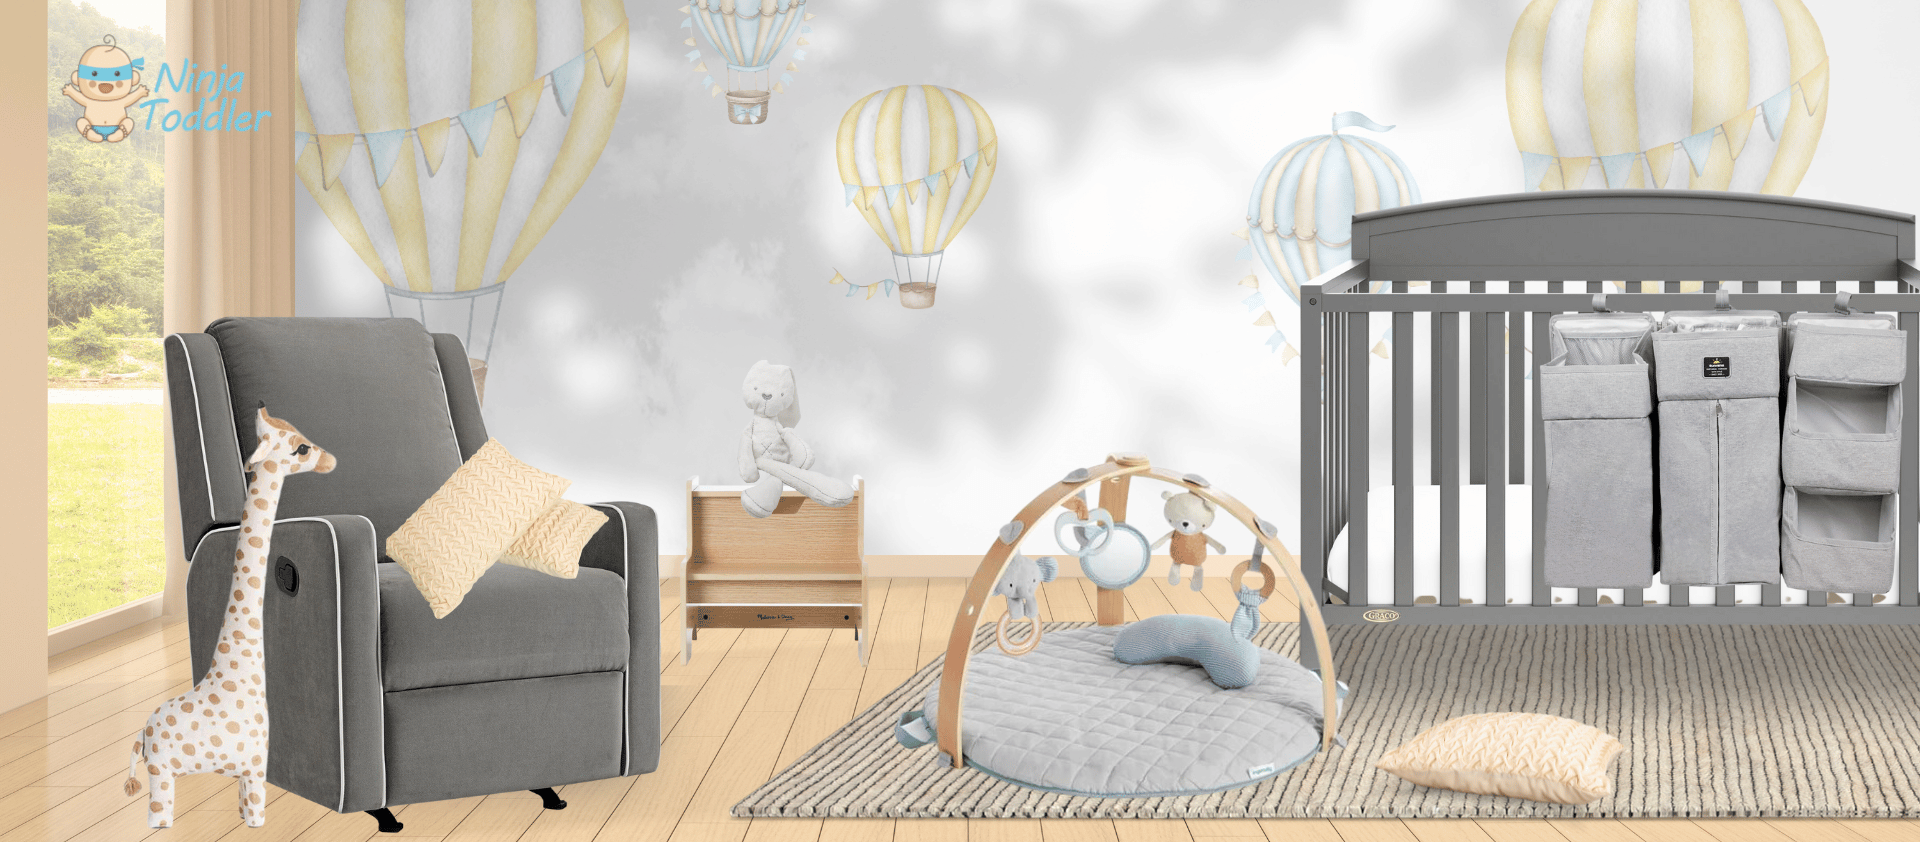 Hot air balloon gender neutral nursery room inspiration, yellow and grey colors | Ninja Toddler